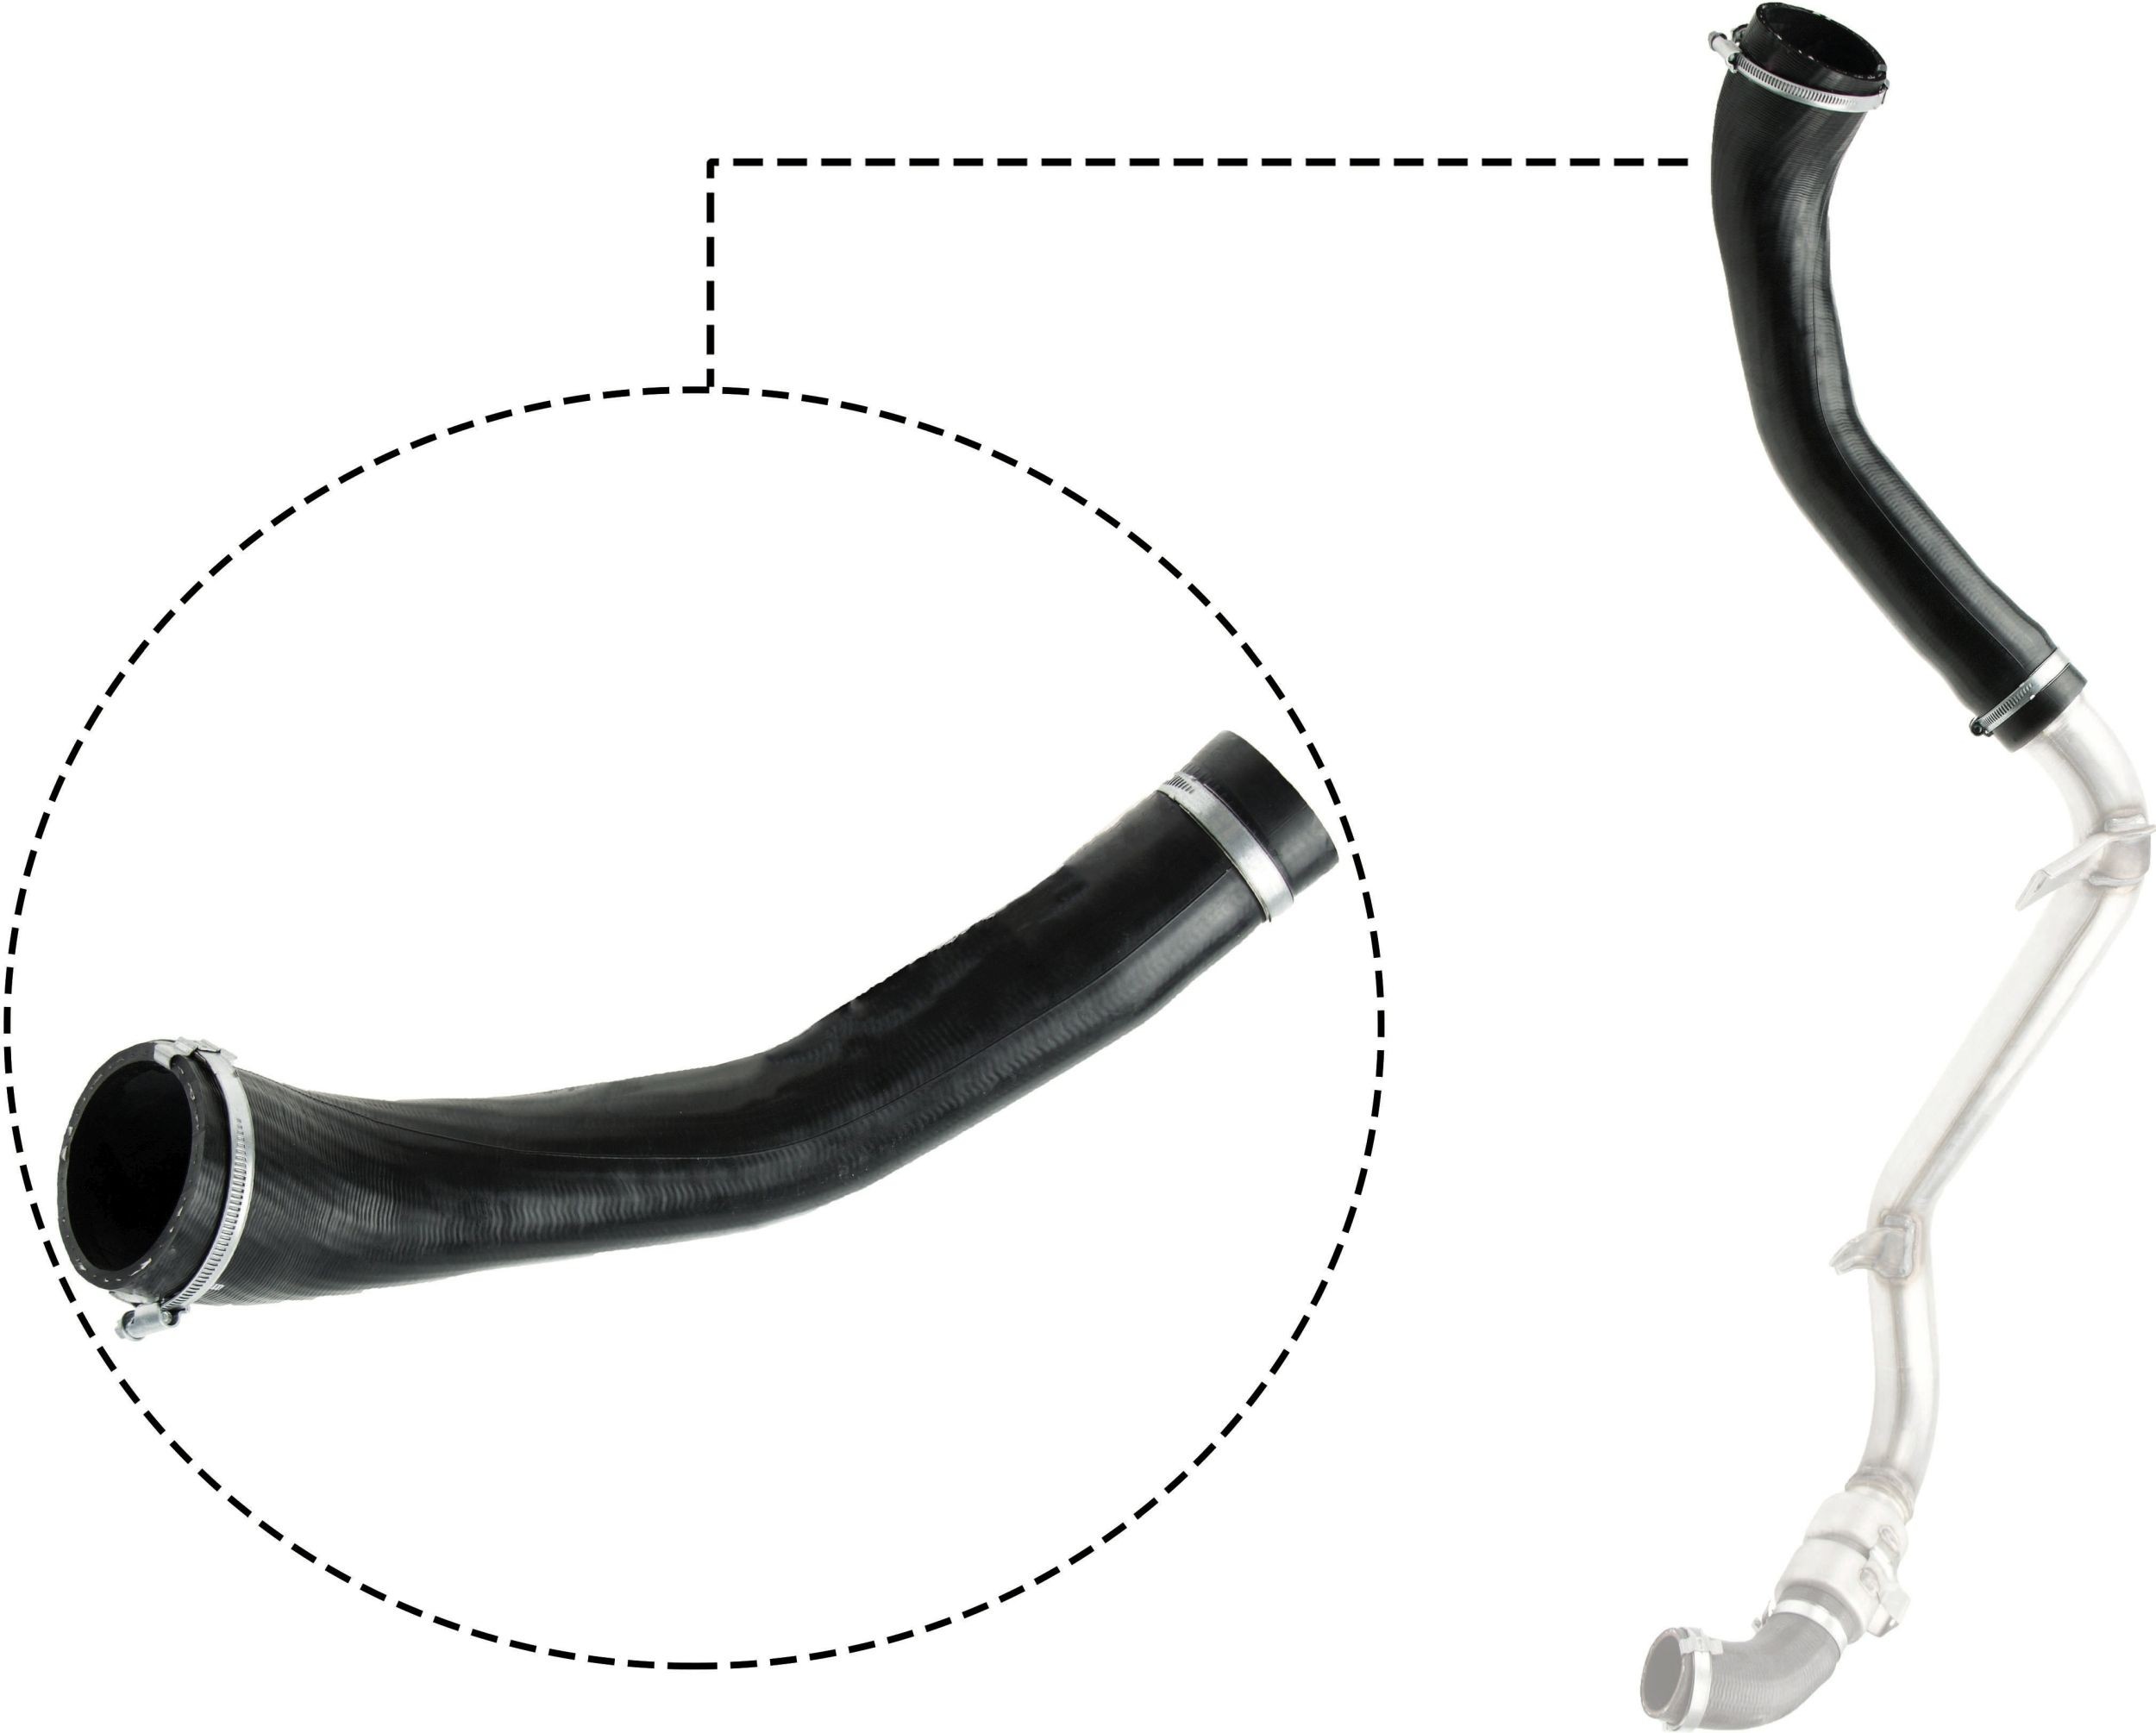 Ford MONDEO Charger intake hose 14358030 GATES 09-0638 online buy